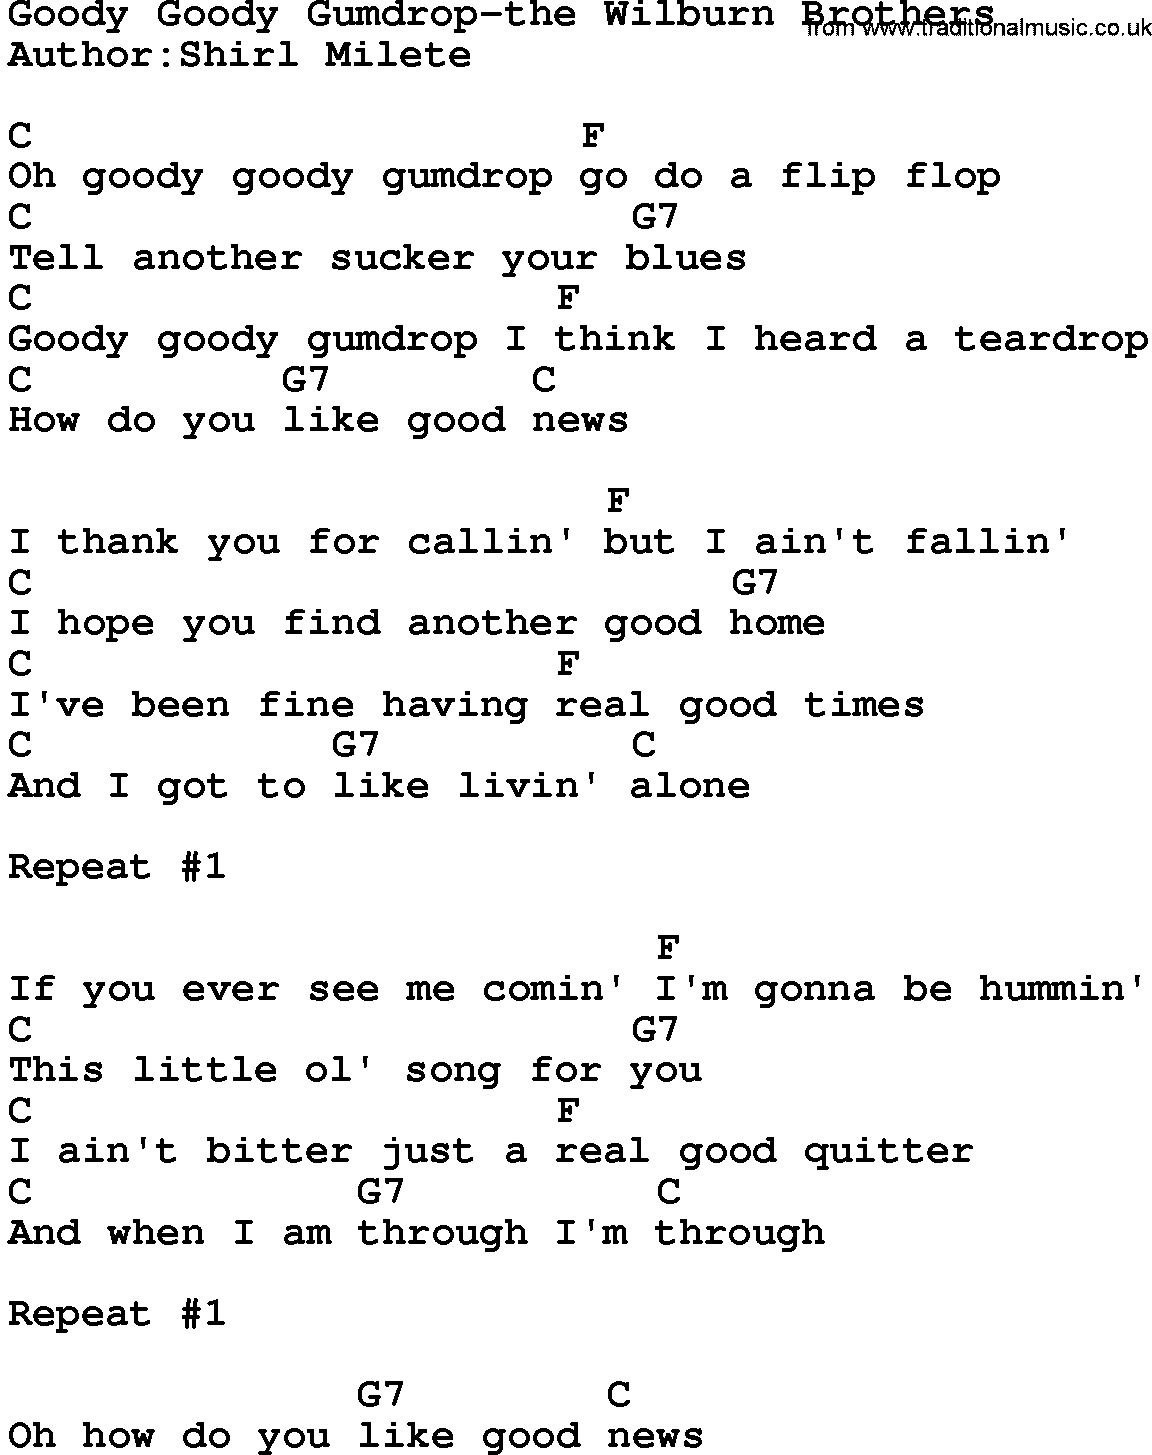 Country music song: Goody Goody Gumdrop-The Wilburn Brothers lyrics and chords